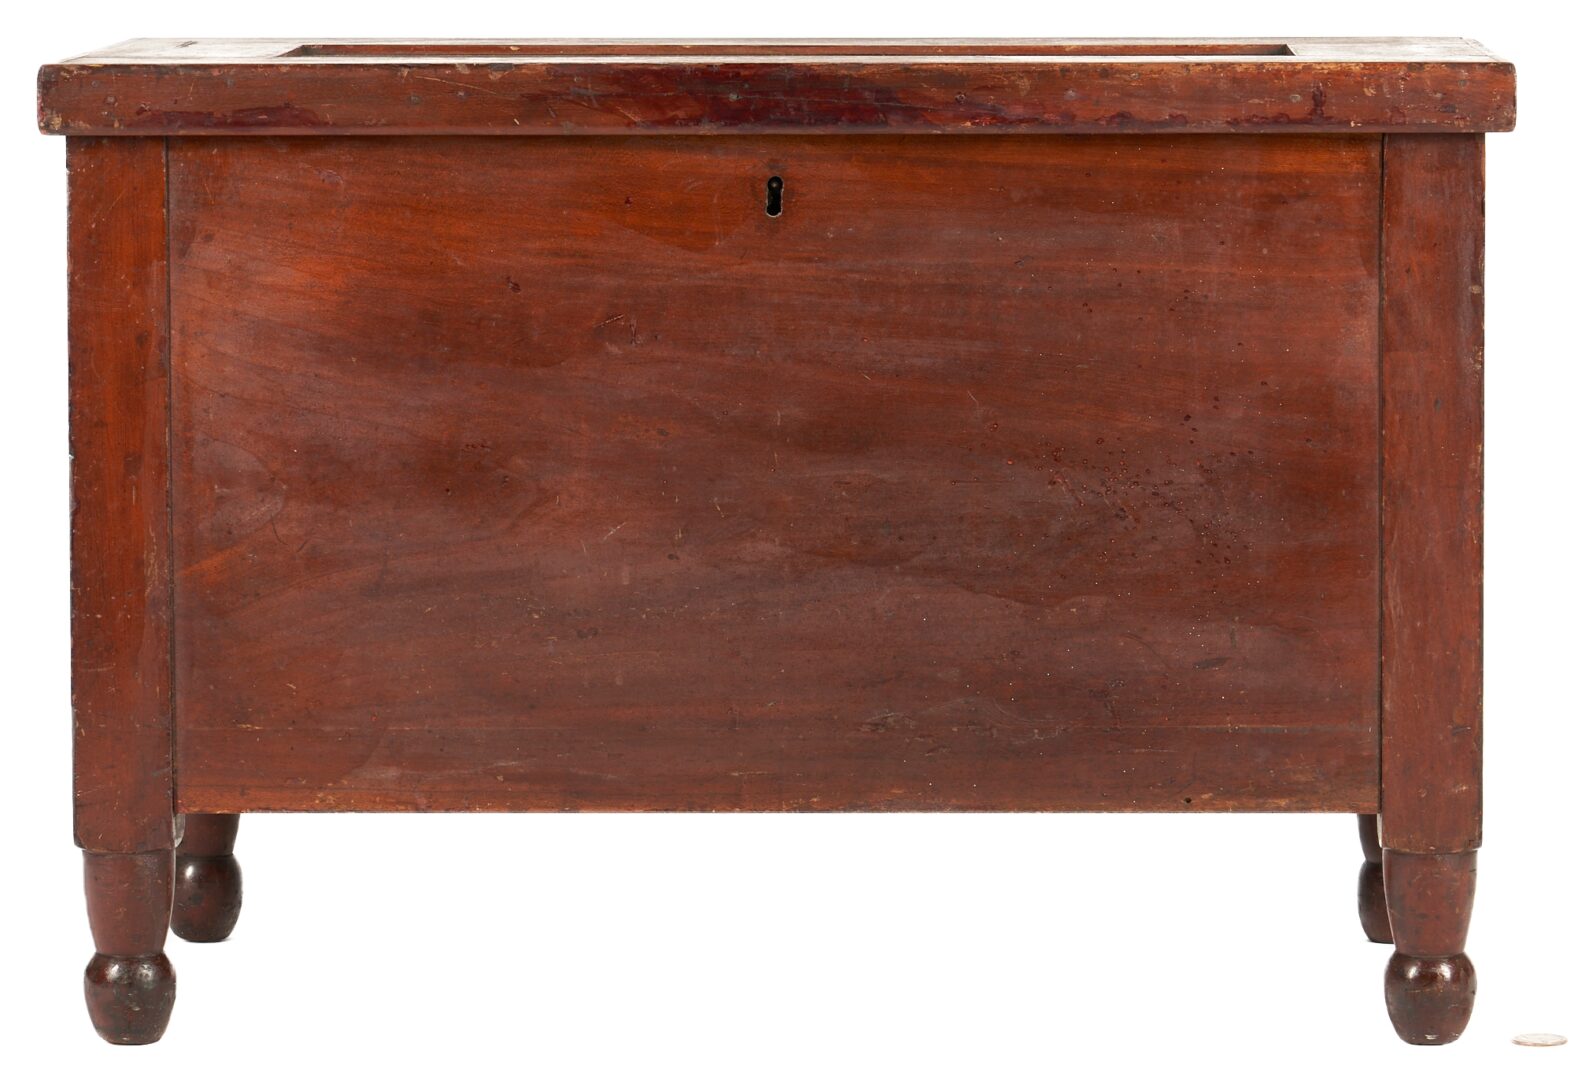 Lot 175: Southern Cherry Sugar Box or Valuables Box